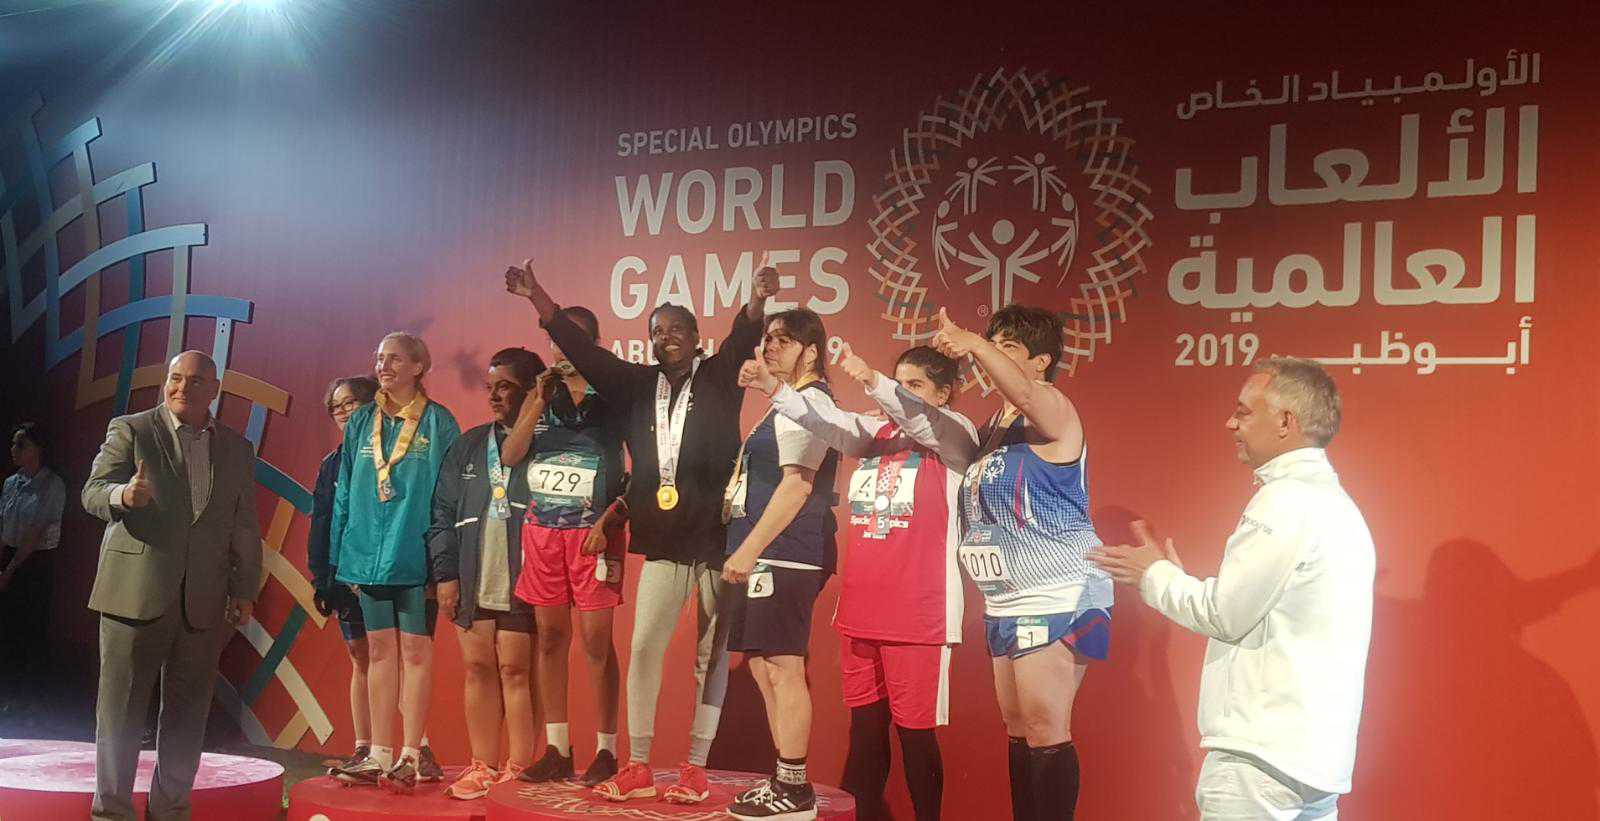 Update on Special Olympics in Abu Dhabi